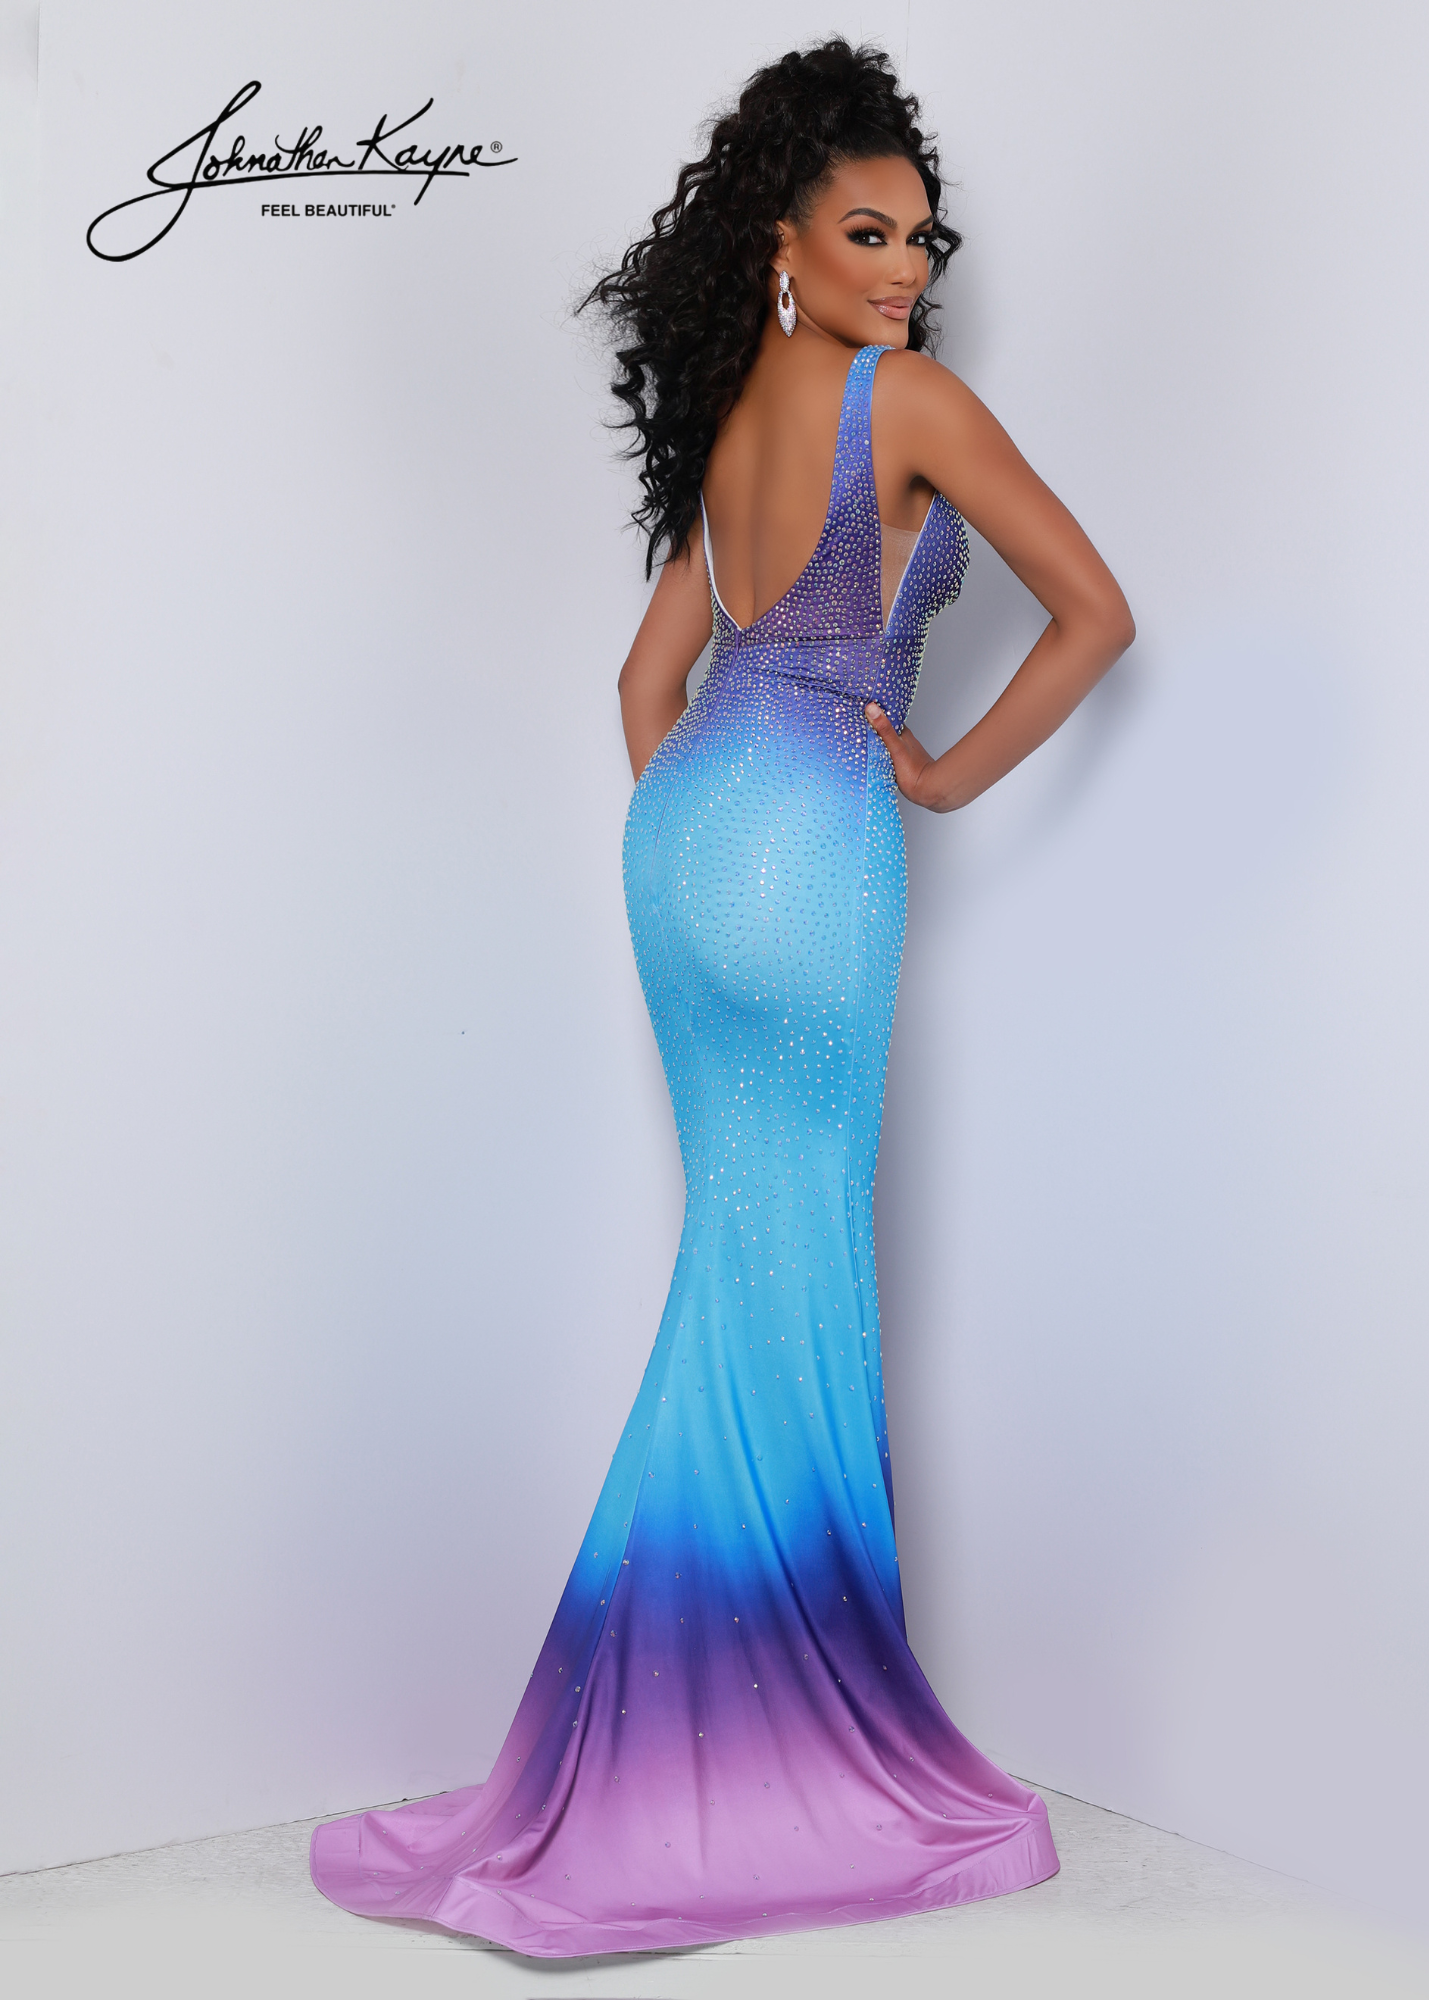 Johnathan Kayne 2501 Long Rainbow Ombre Pageant Dress Formal Gown Crystal Pastel Johnathan Kayne 2501 Long Rainbow Ombre Pageant Dress Formal Gown Crystal Pastel  Available Sizes: 00,0,2,4,6,8,10,12,14,16  Available Colors: Sunset, Moonlight, Galaxy